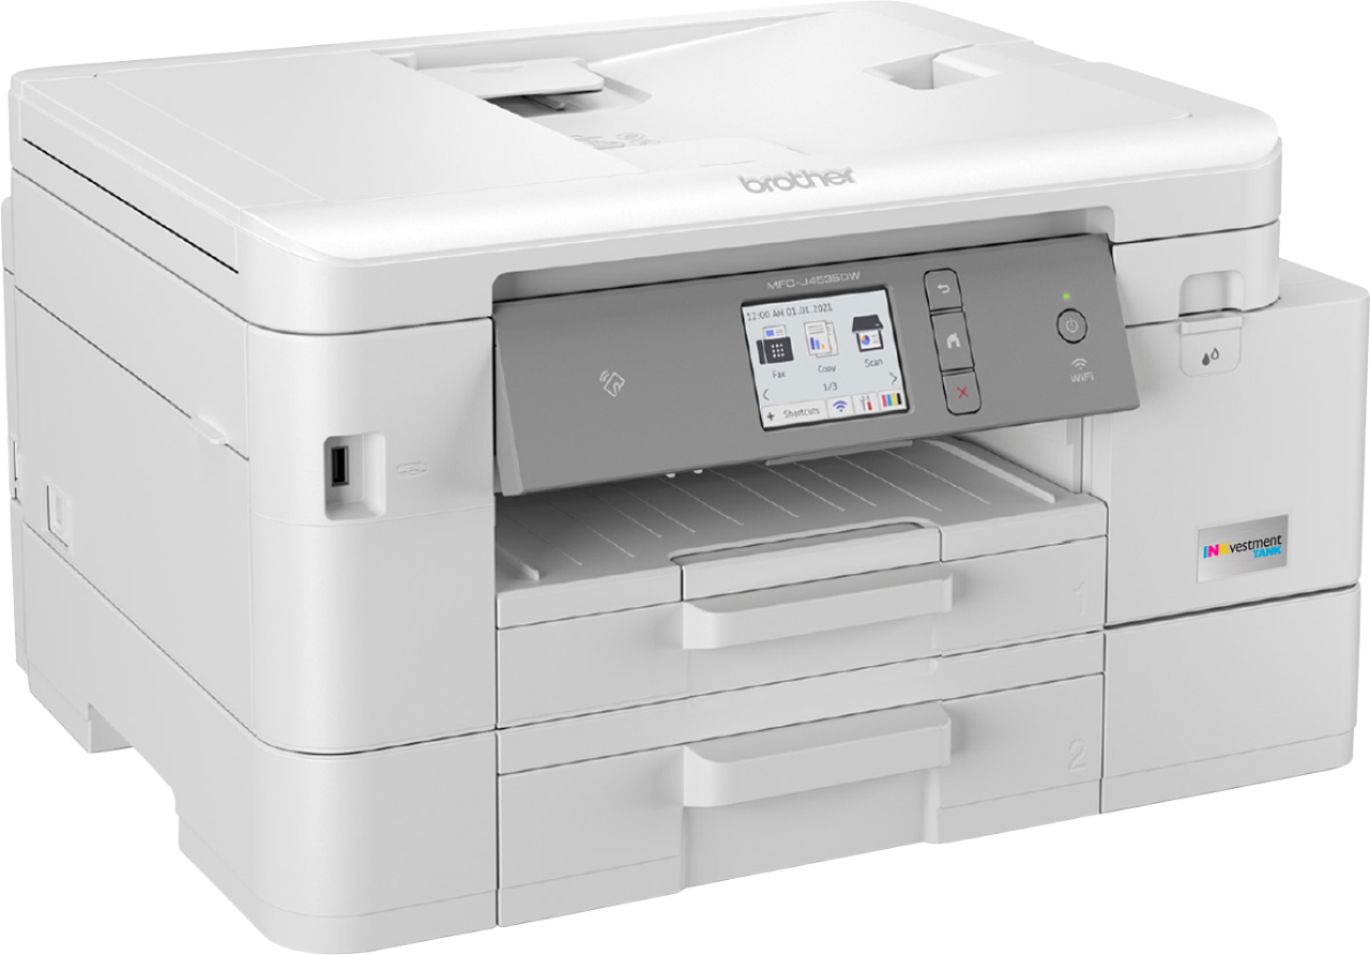 Print Brother Dcp-j1800dw Mfc-ink A4 - Imprimante